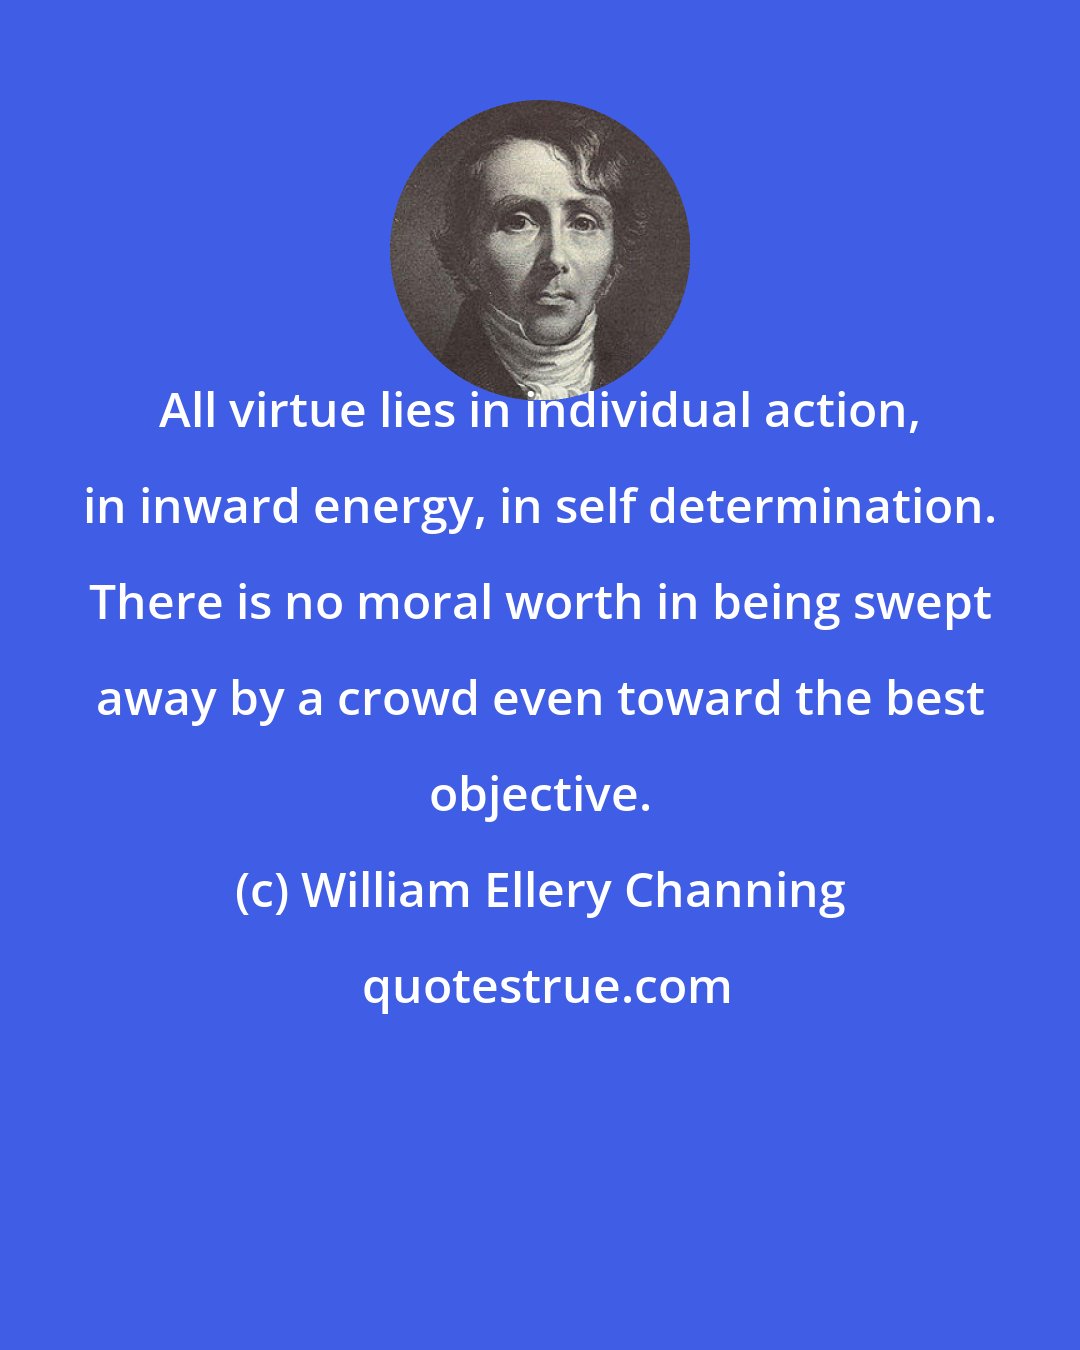 William Ellery Channing: All virtue lies in individual action, in inward energy, in self determination. There is no moral worth in being swept away by a crowd even toward the best objective.